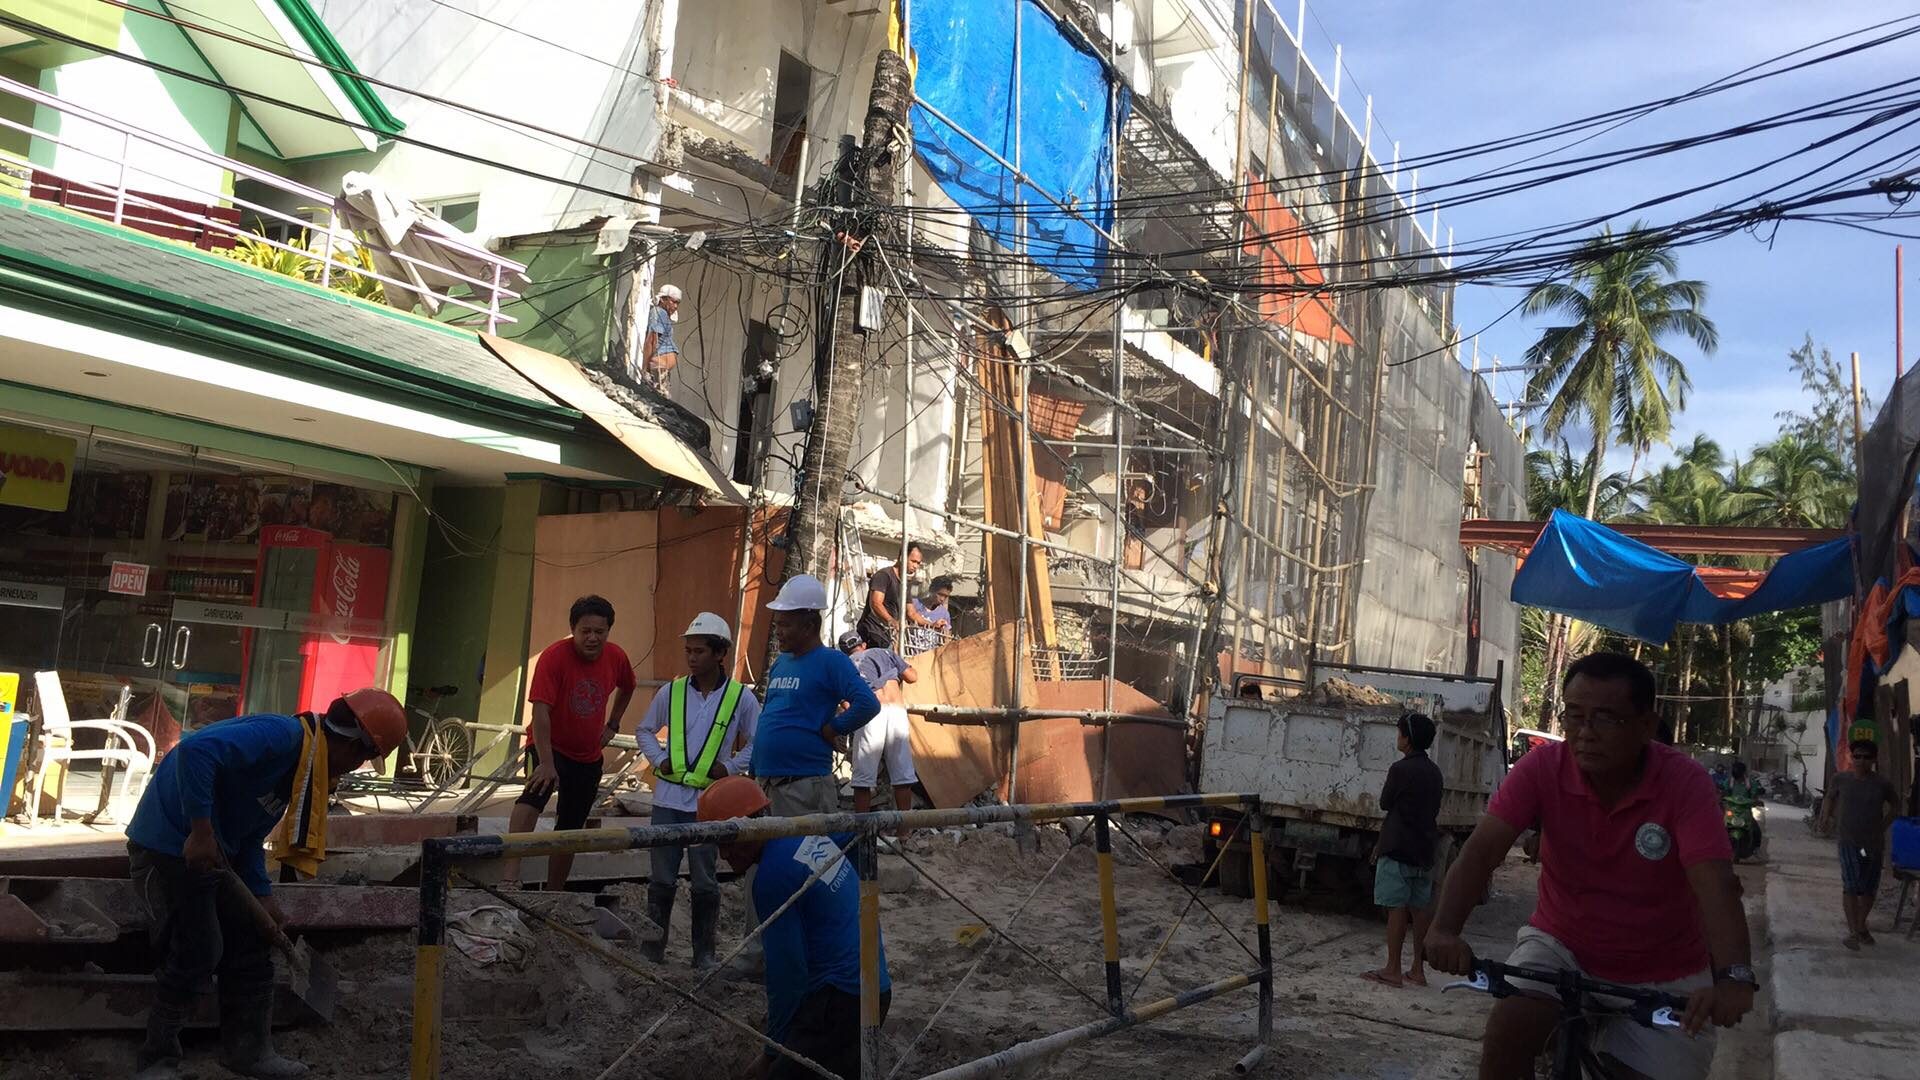 DPWH: Boracay Circumferential Road to fully open by December 2018